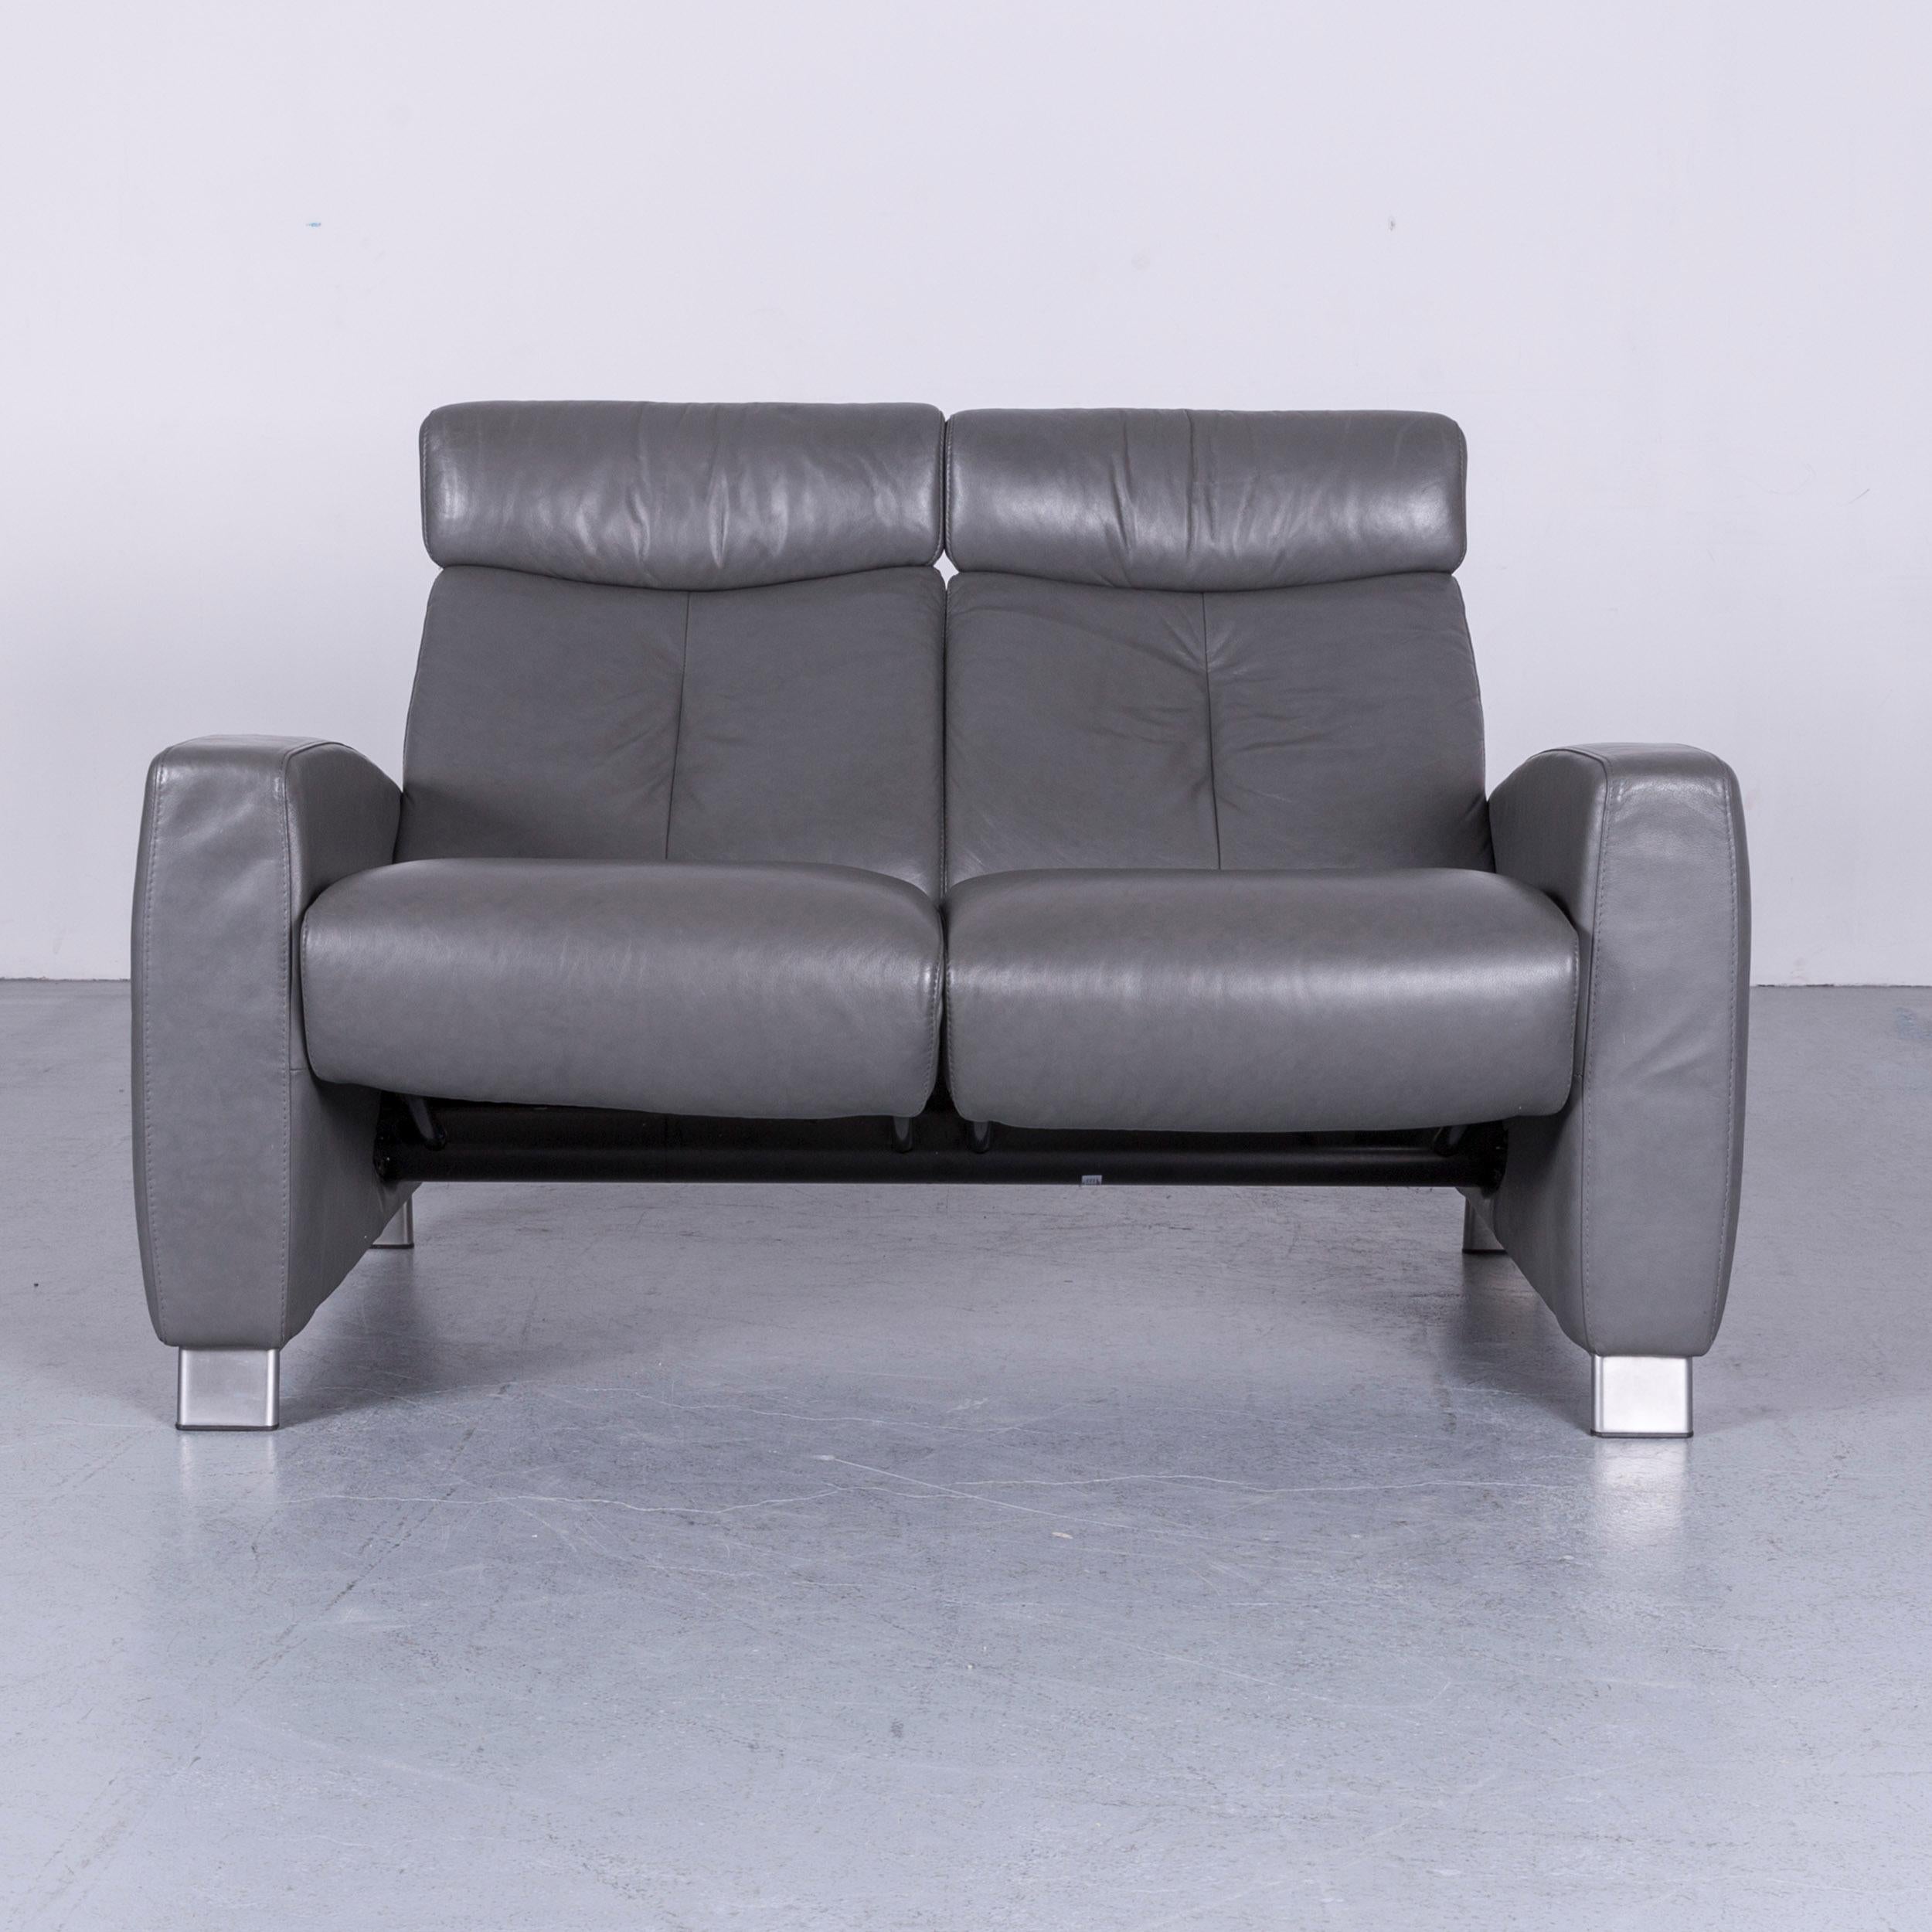 We bring to you an Ekornes Stressless Arion sofa grey leather two-seat with function.







    